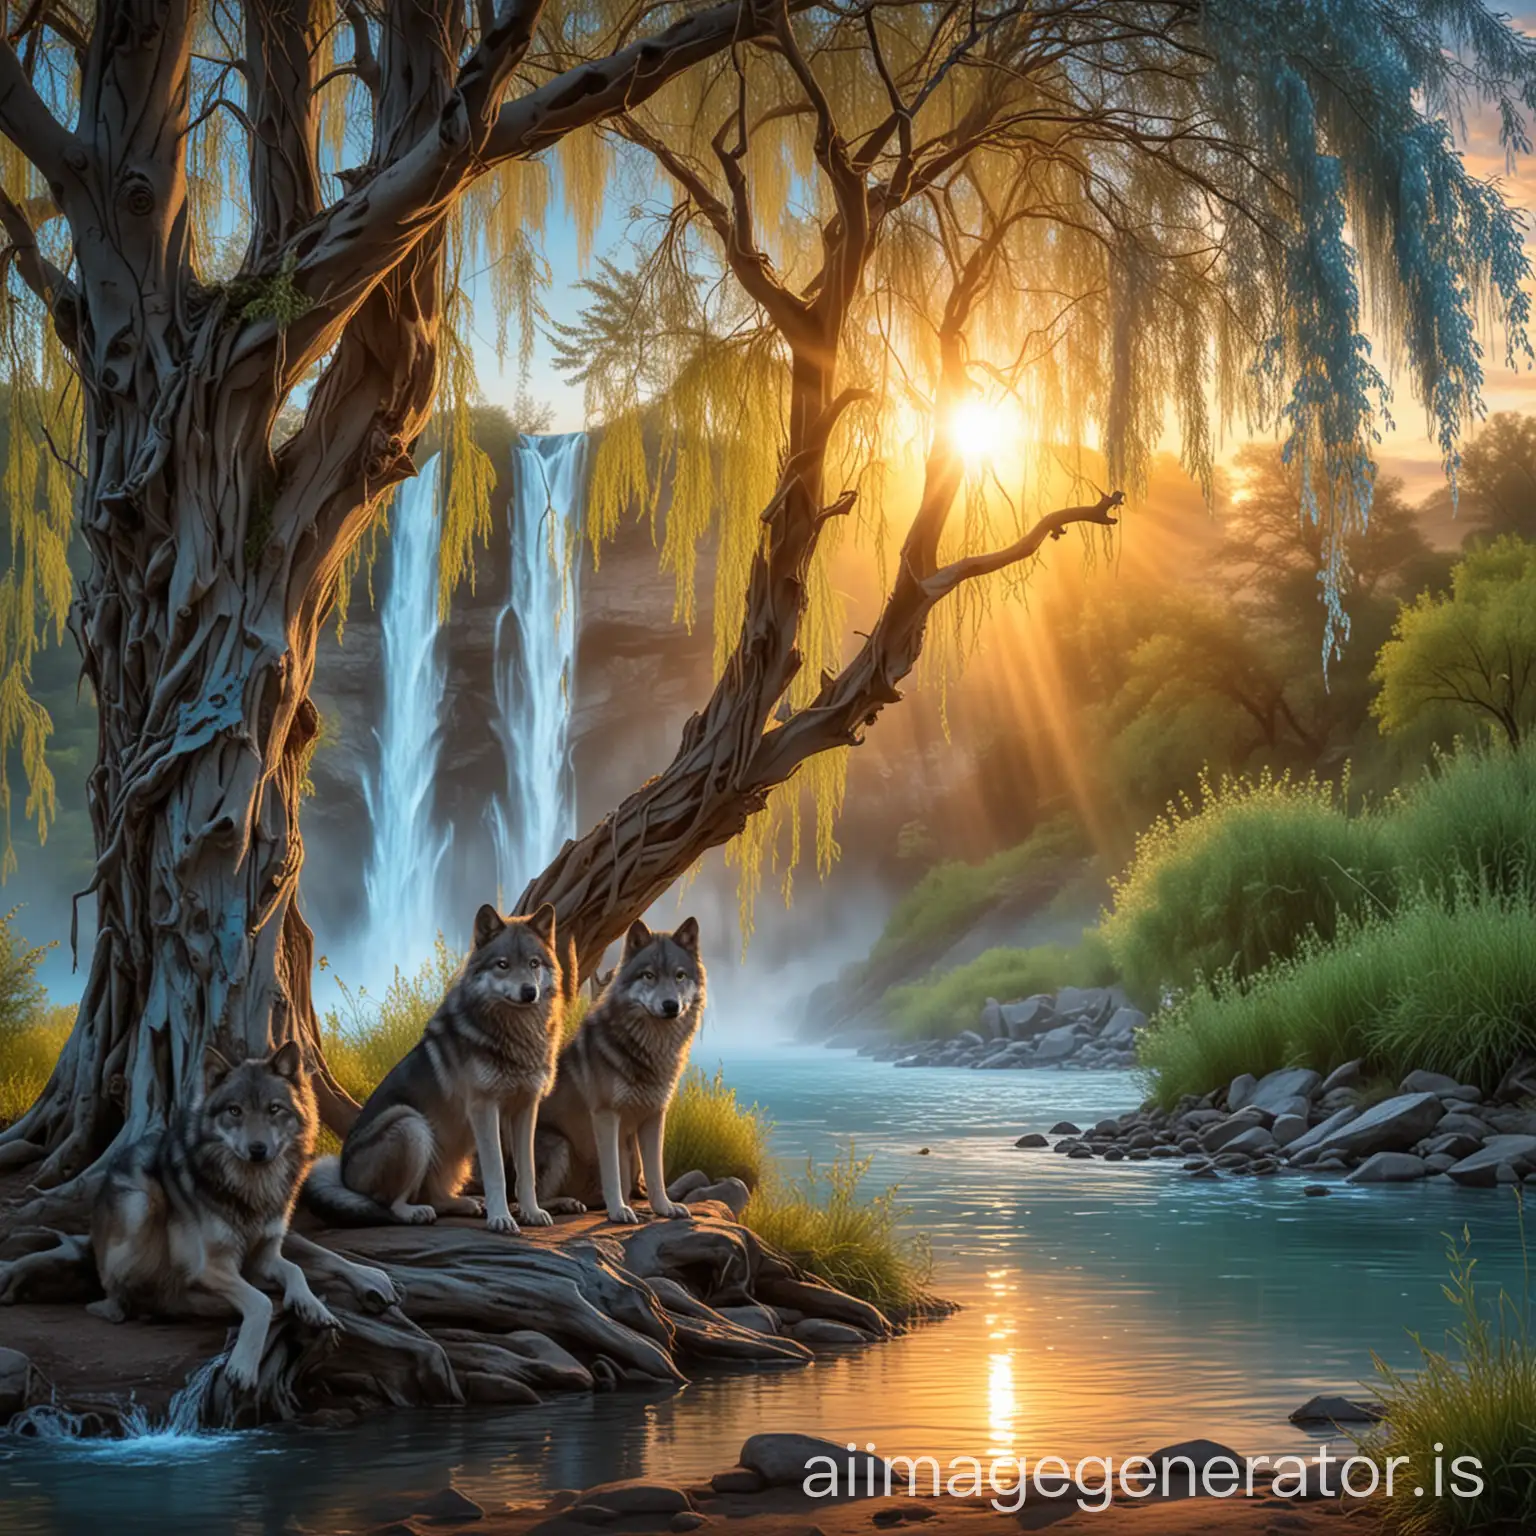 Two-Wolves-Sitting-Under-a-Willow-Tree-by-Baby-Blue-Waterfall-at-Sunrise